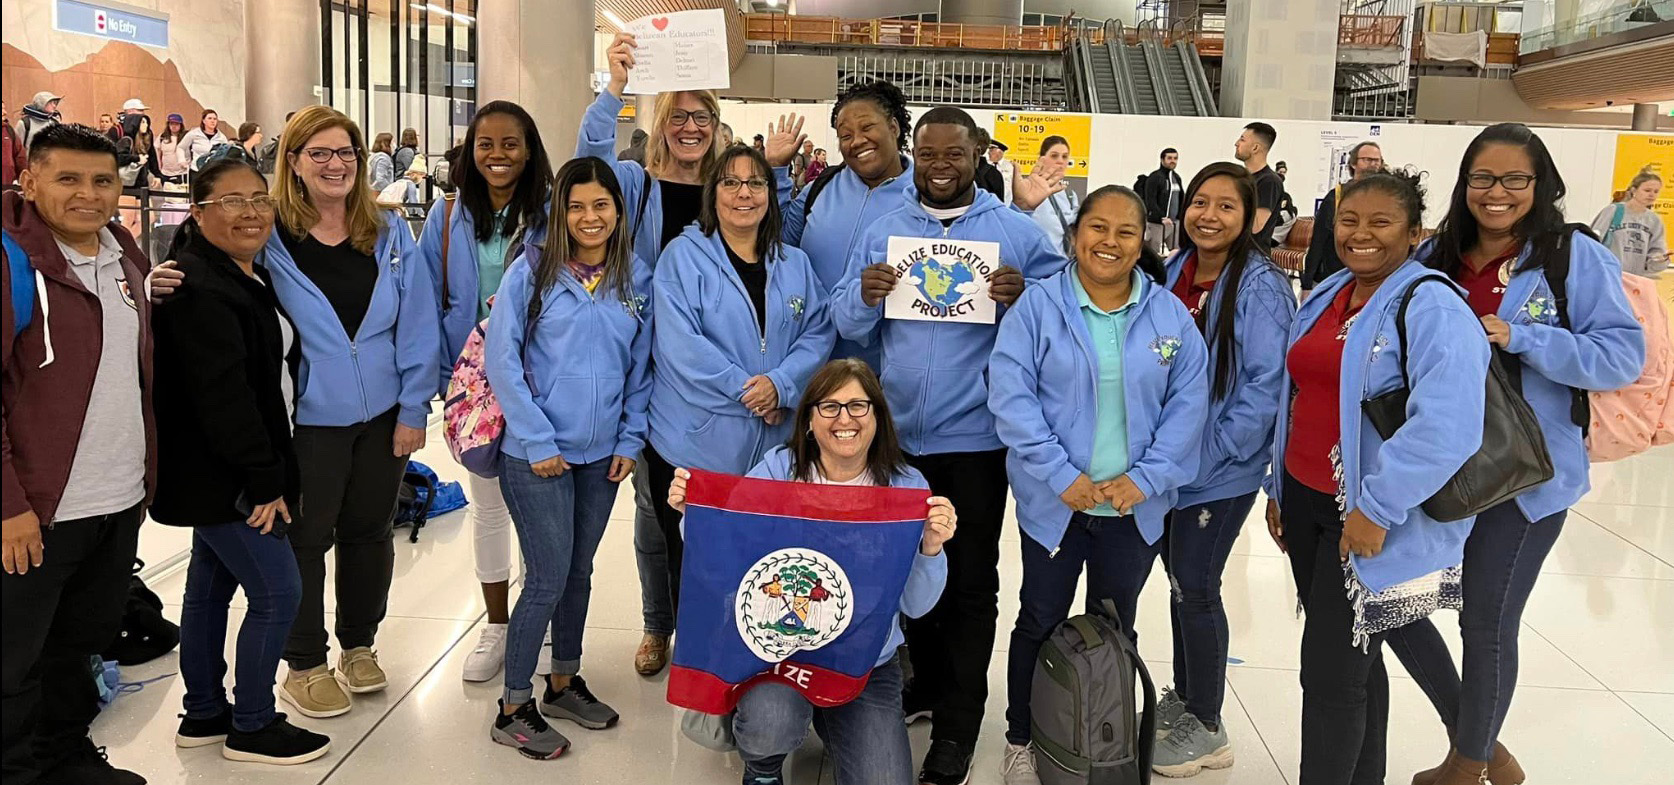 Belize Educators in Denver International Airport posing for a picture